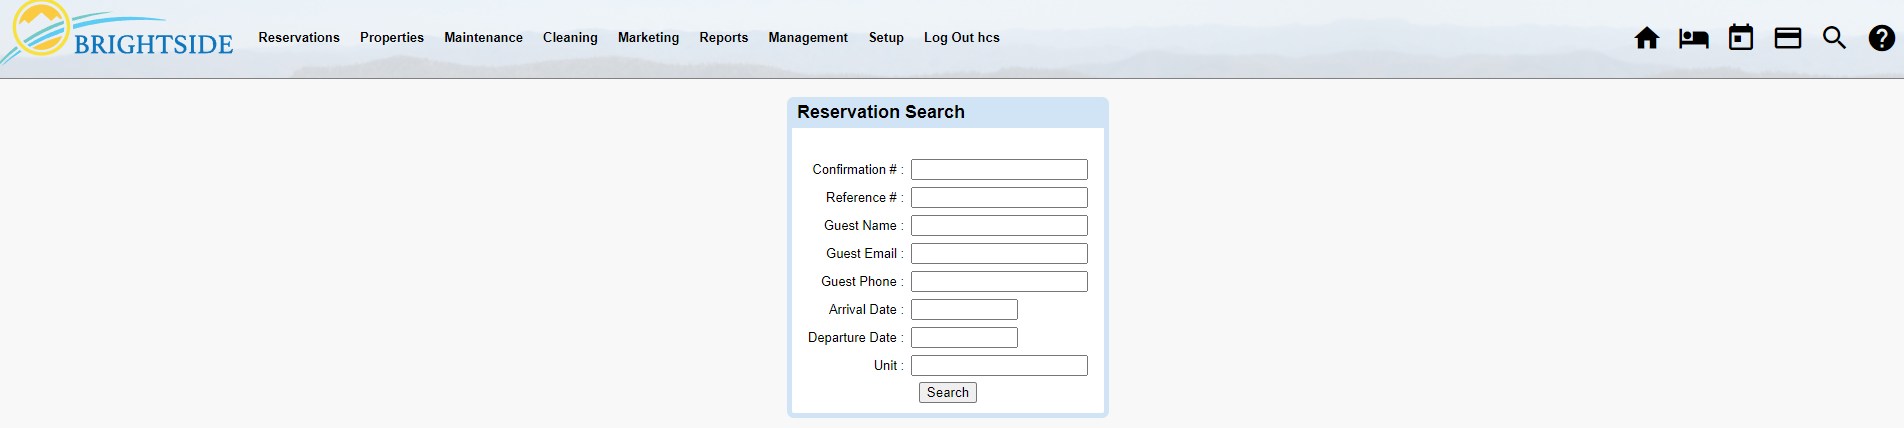 Reservation Search Tool